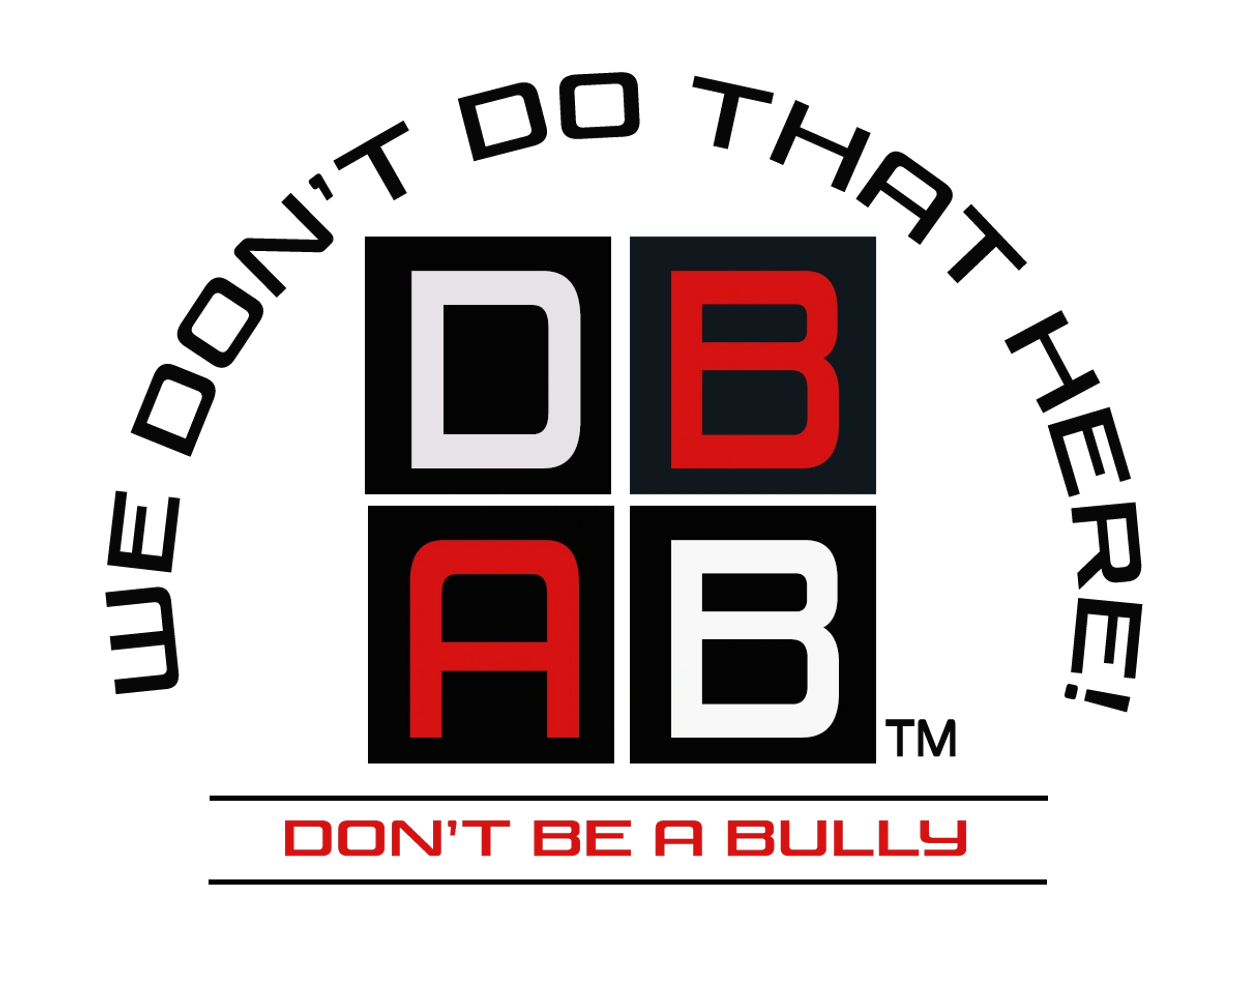 Don't Be a Bully Project: "We Don't Do That Here!" logo